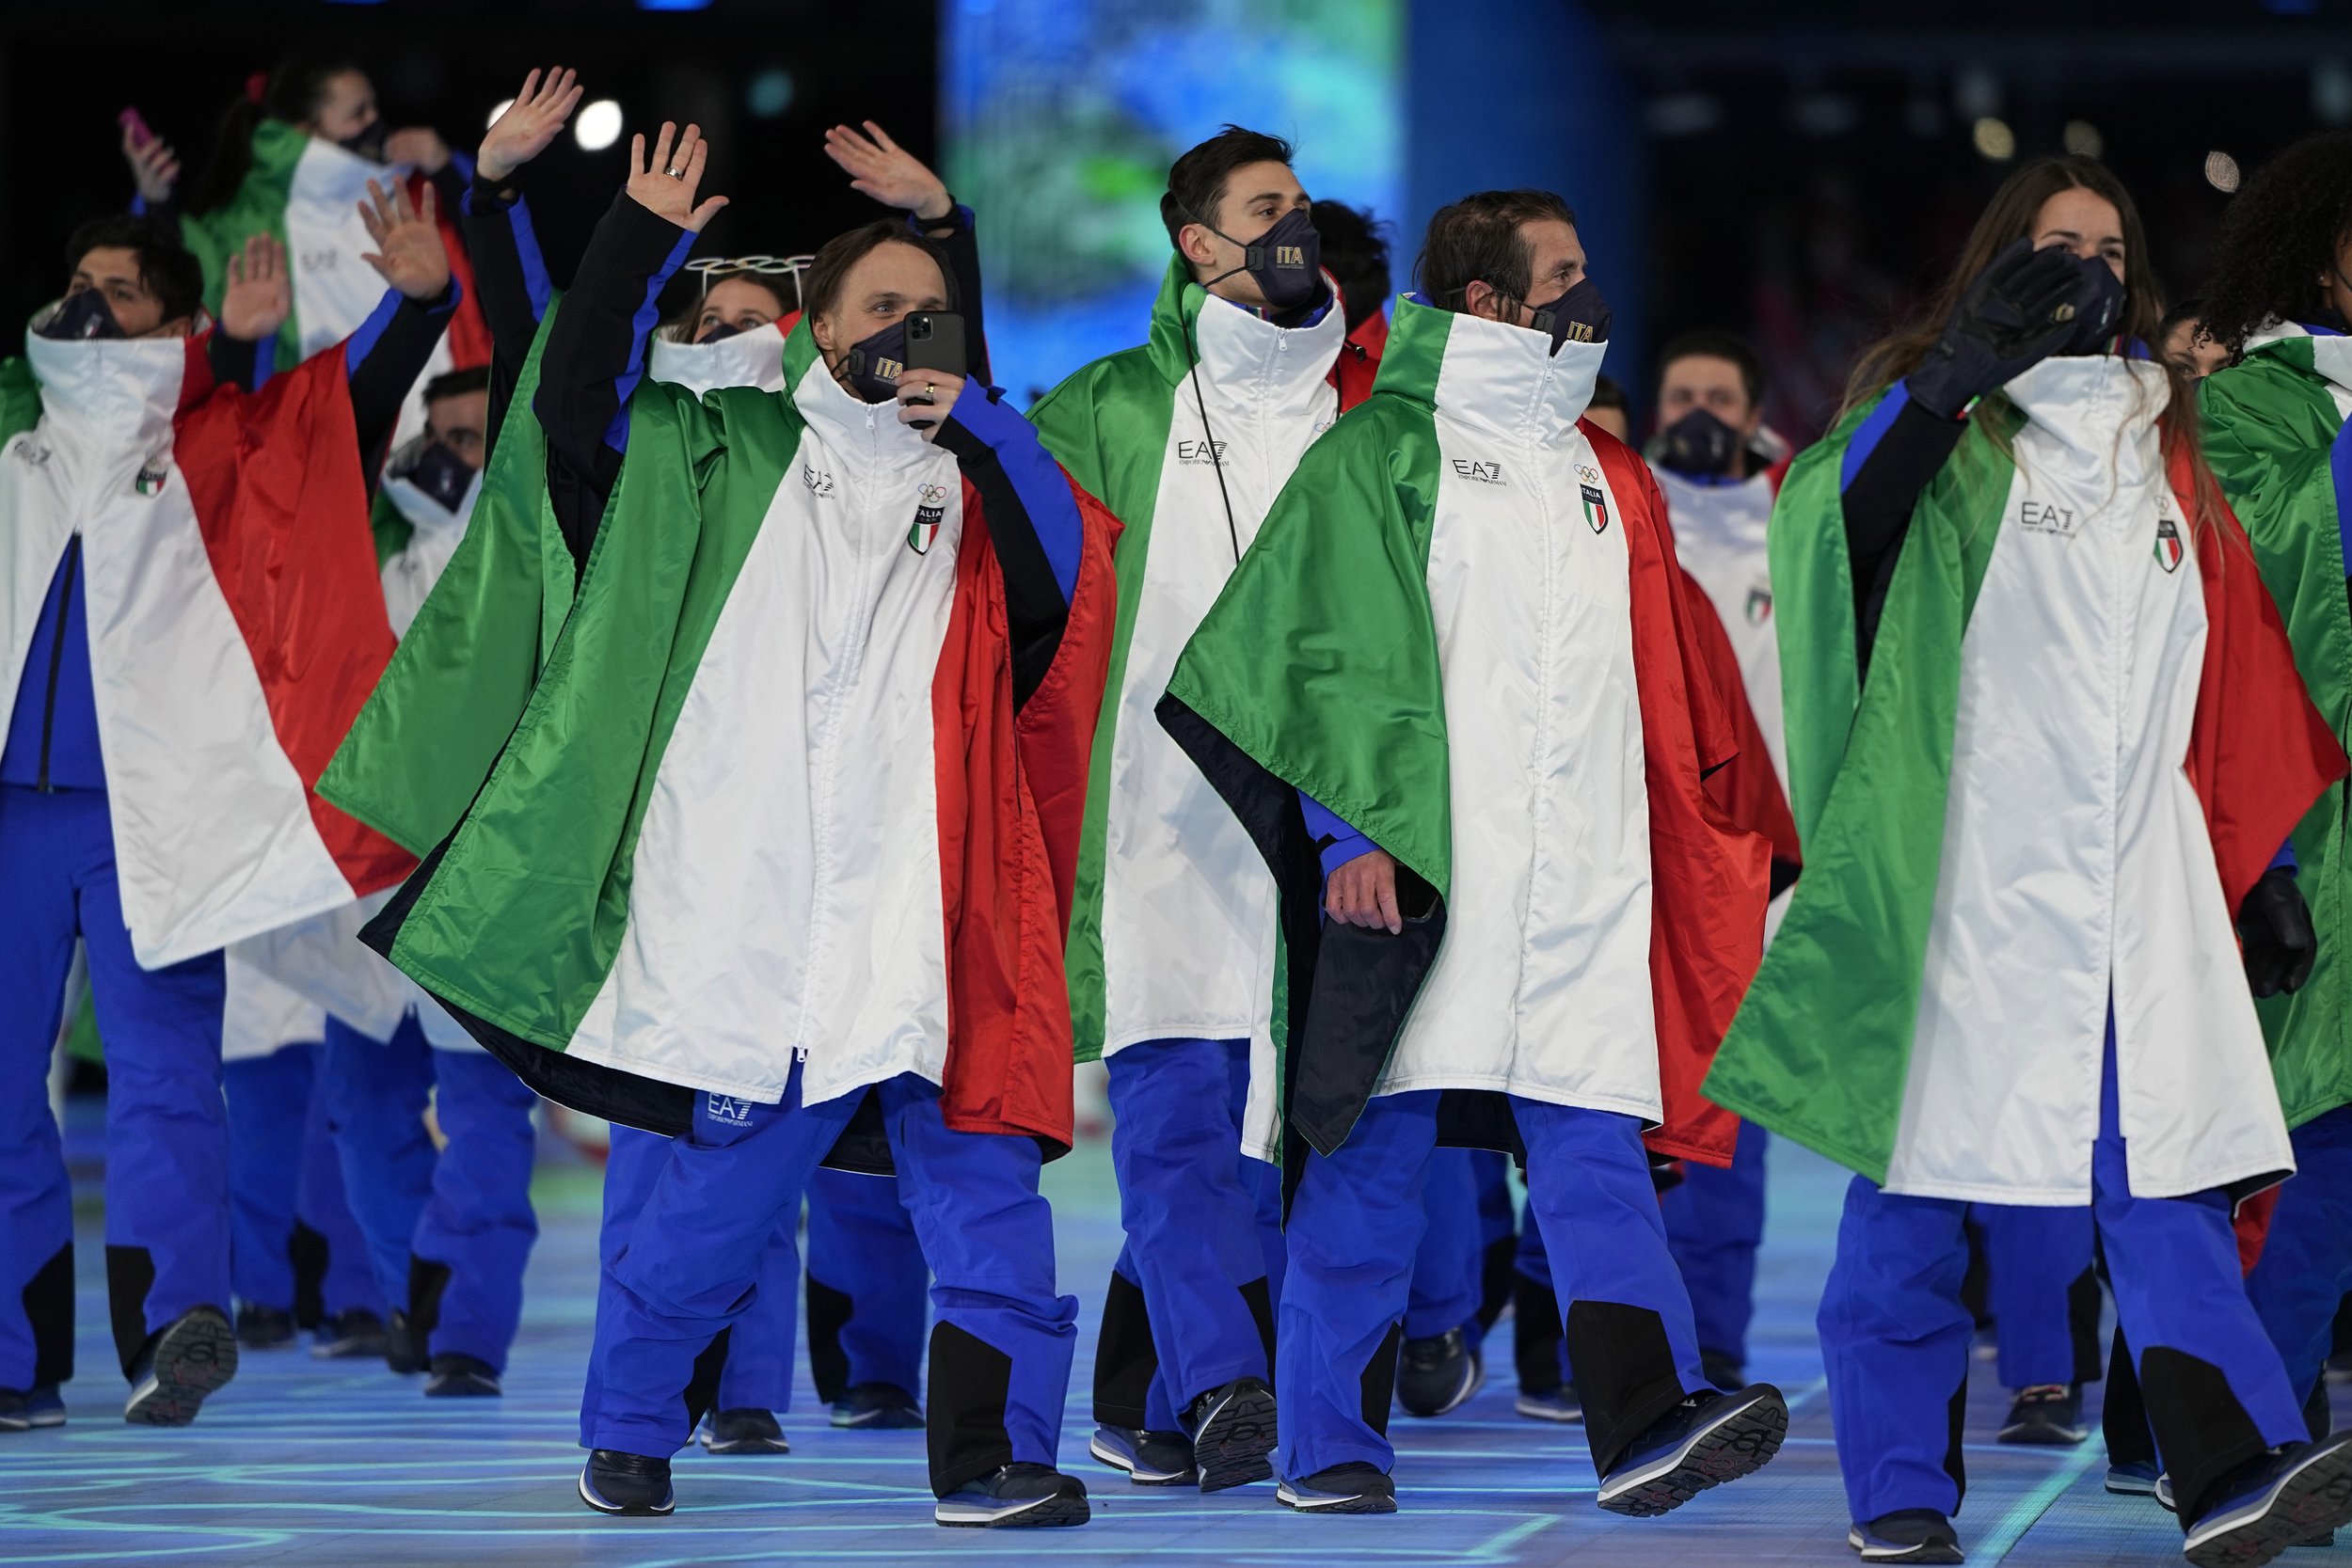  Italian athletes walk into the stadium during the opening ceremony of the 2022 Winter Olympics, Friday, Feb. 4, 2022, in Beijing. (AP Photo/Jae C. Hong) 